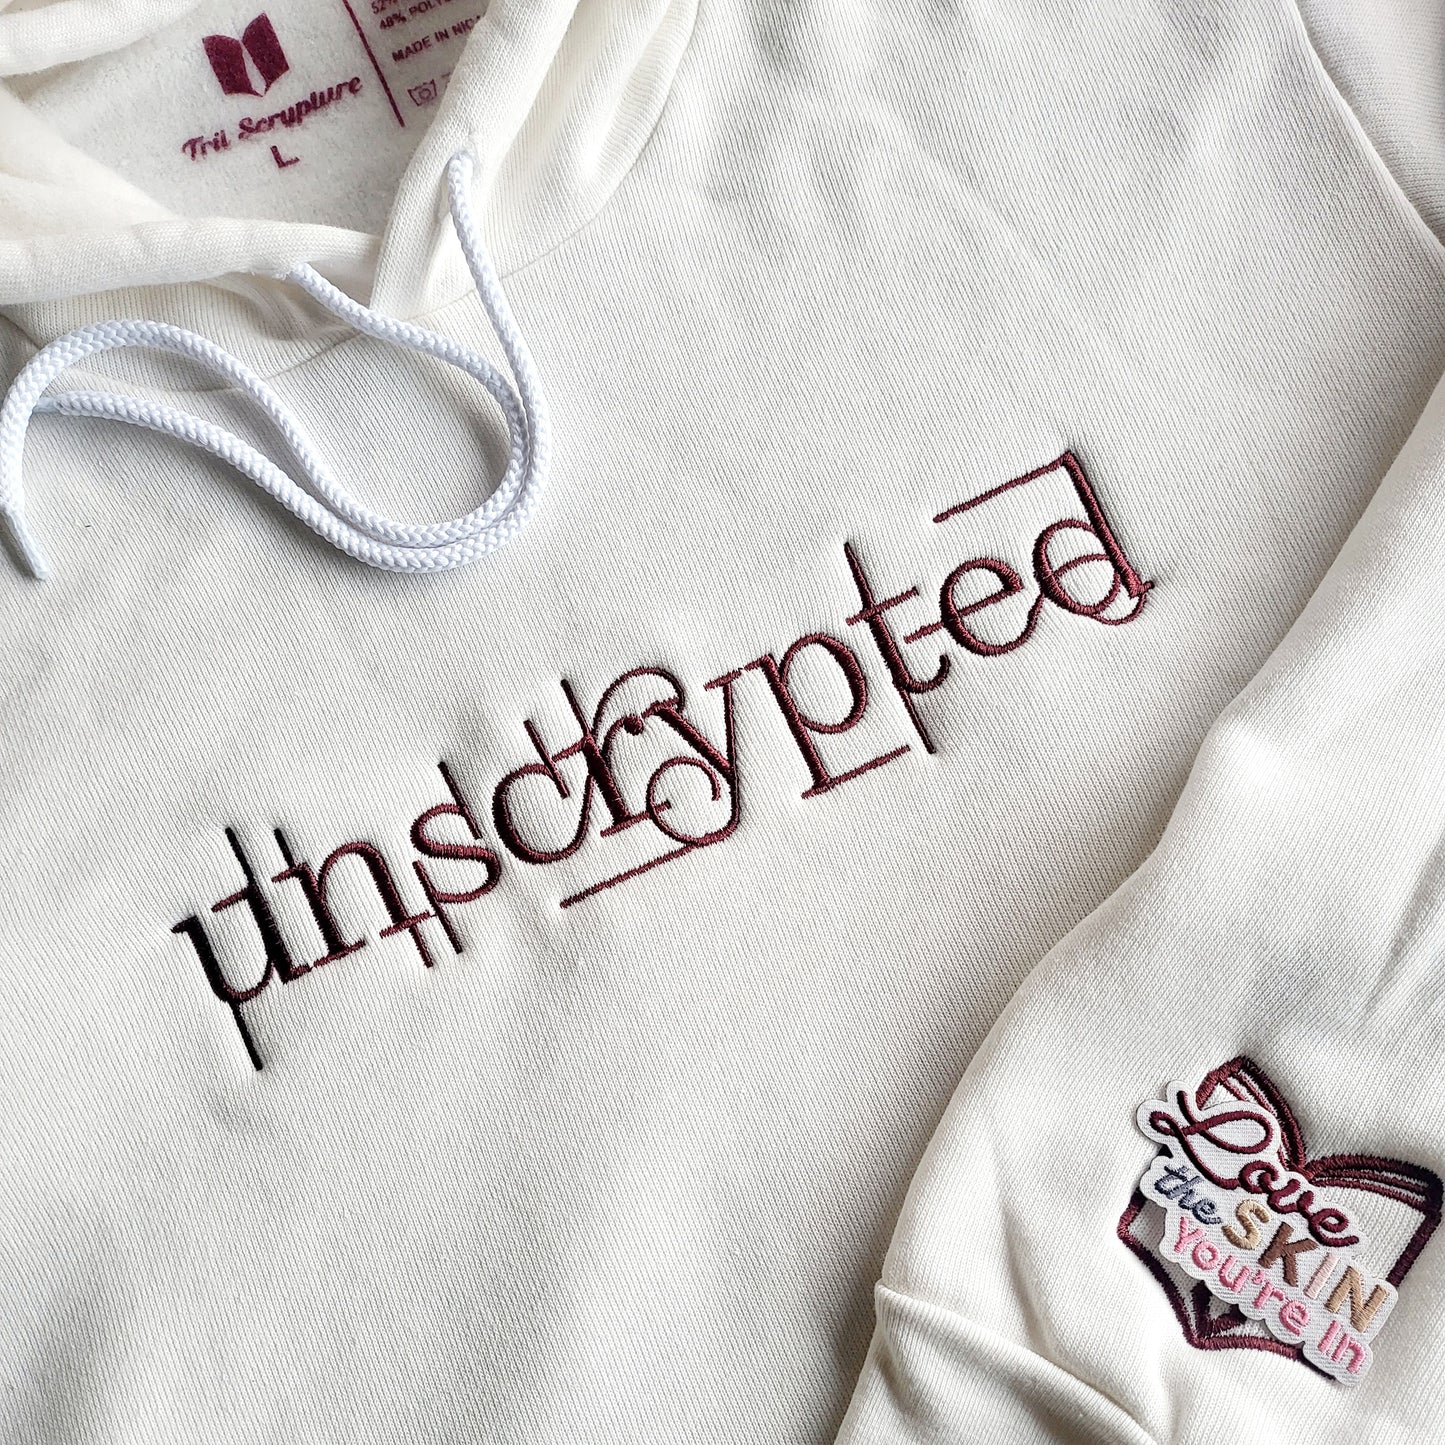 Unscrypted Women's History Month Hoodie - Vintage White